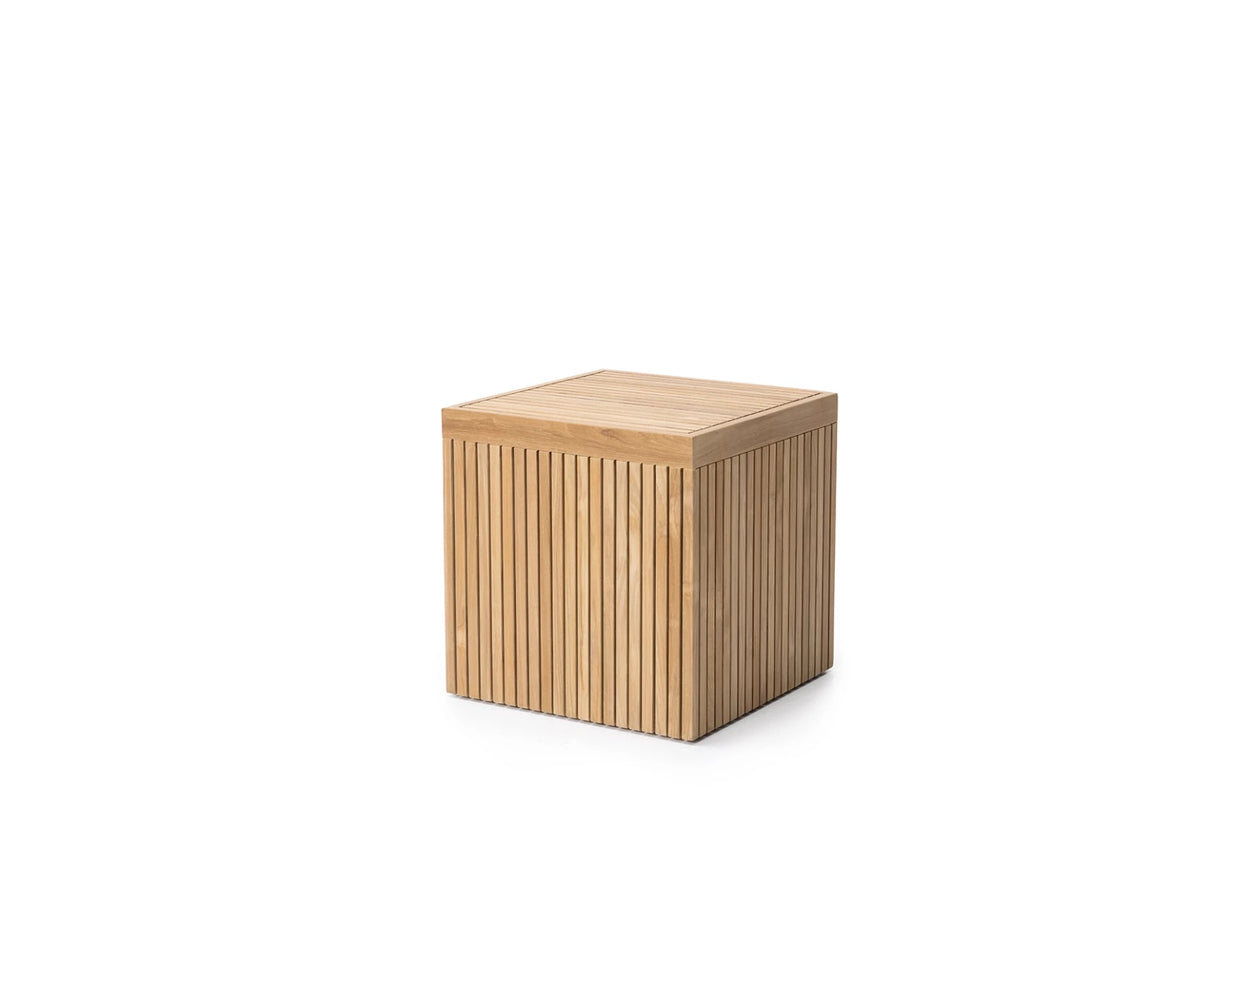 Dotty Cube table